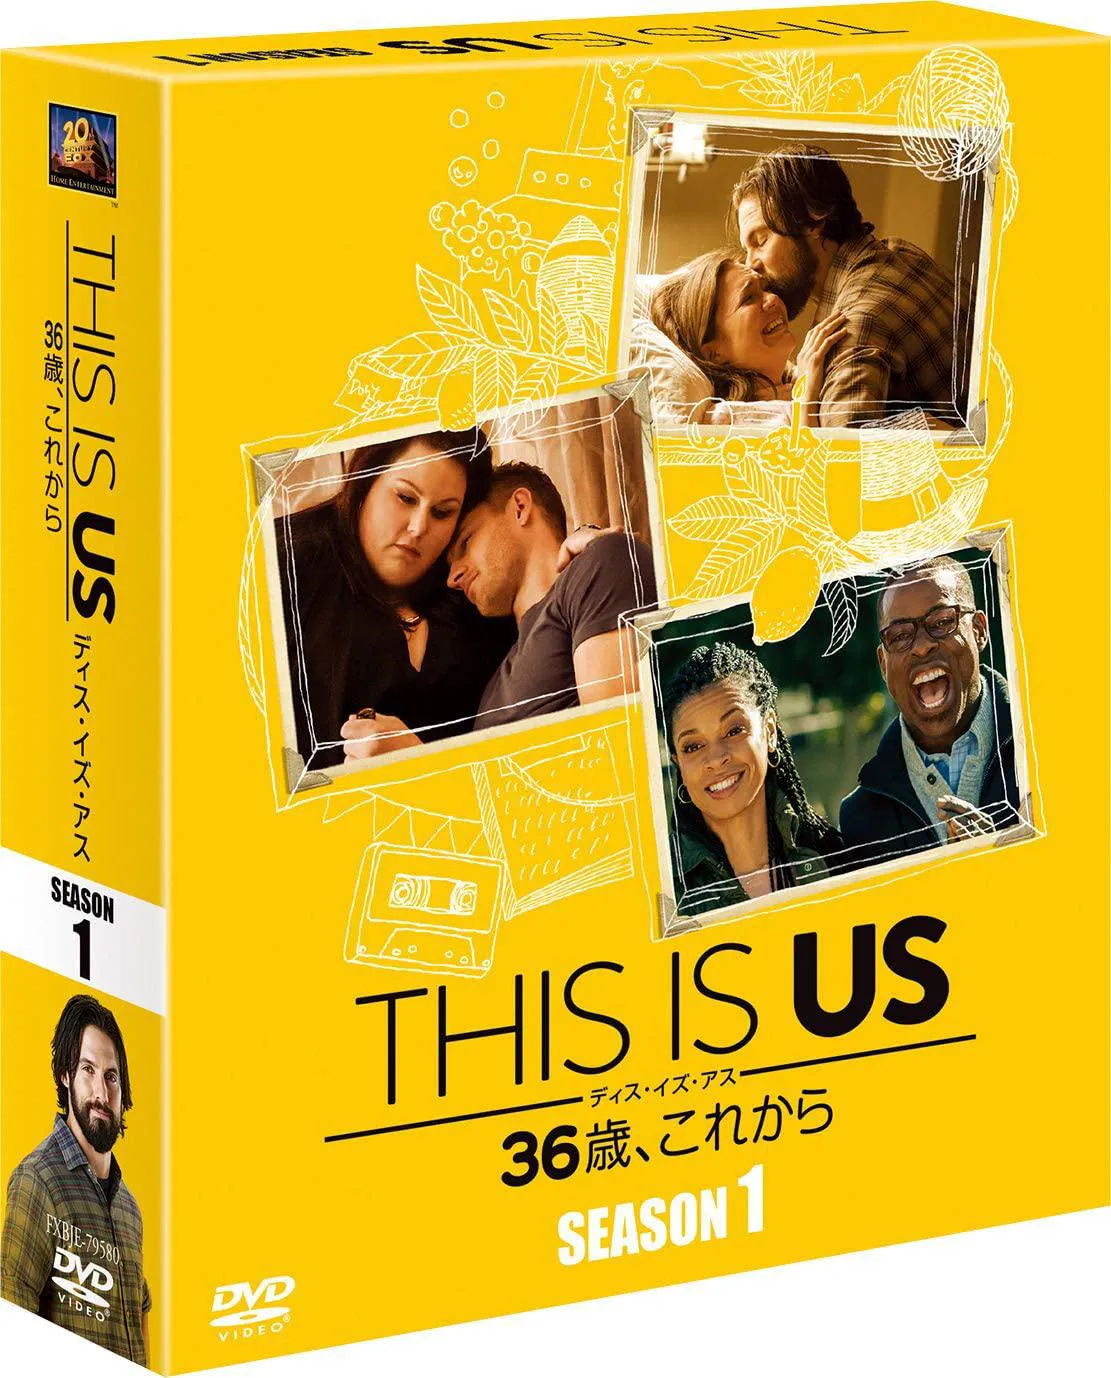 THIS IS US ディス・イズ・アス 36歳、これから(シーズン1)[DVD]